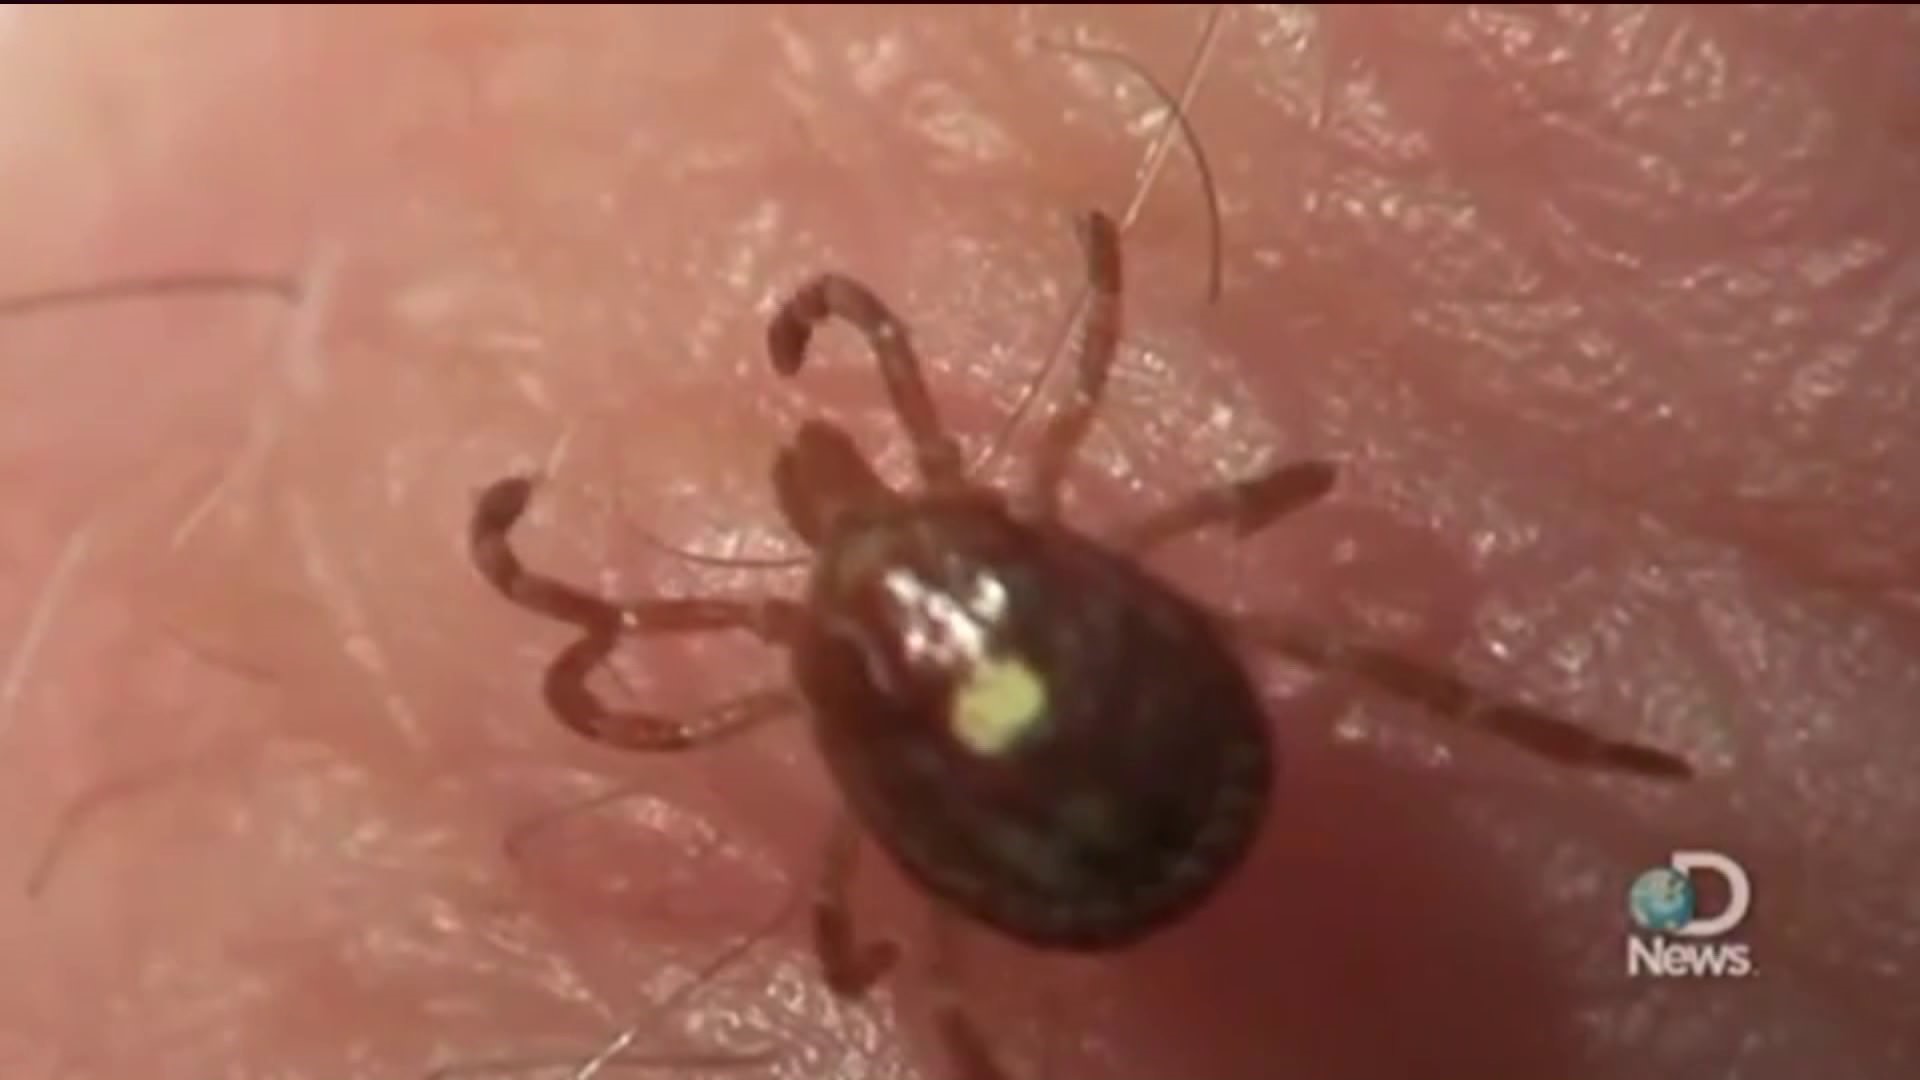 With increase in ticks comes possibility of more dangerous diseases